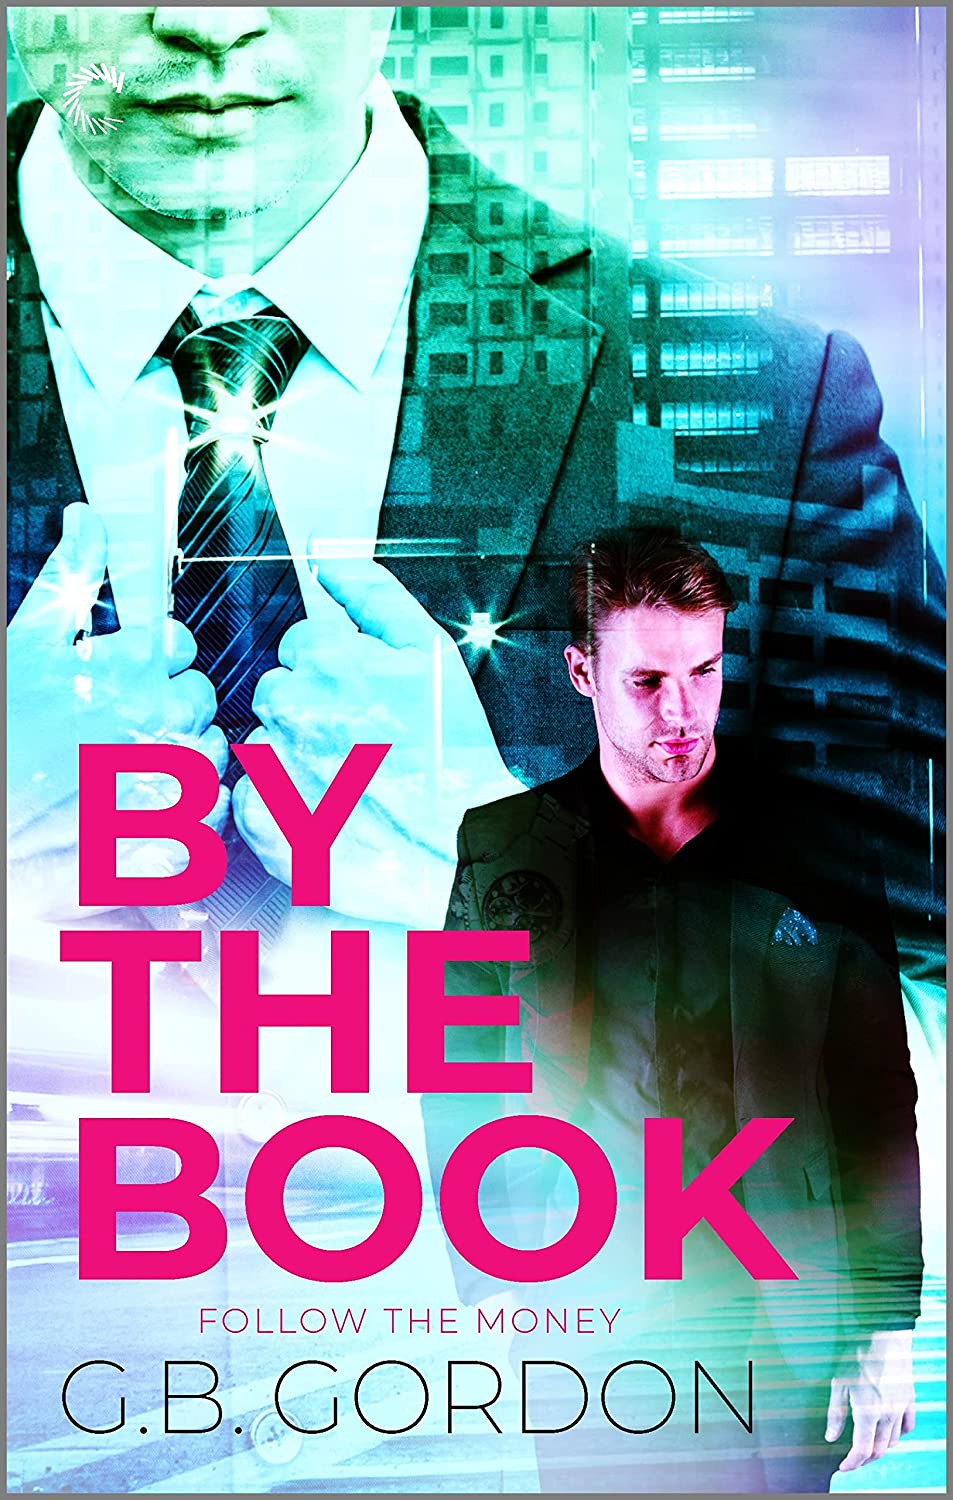 "Book Cover showing two men in suits in front of a background of highrises. Colors are blue-green and pink. Title reads: By the Book Follow the Money G.B. Gordon "